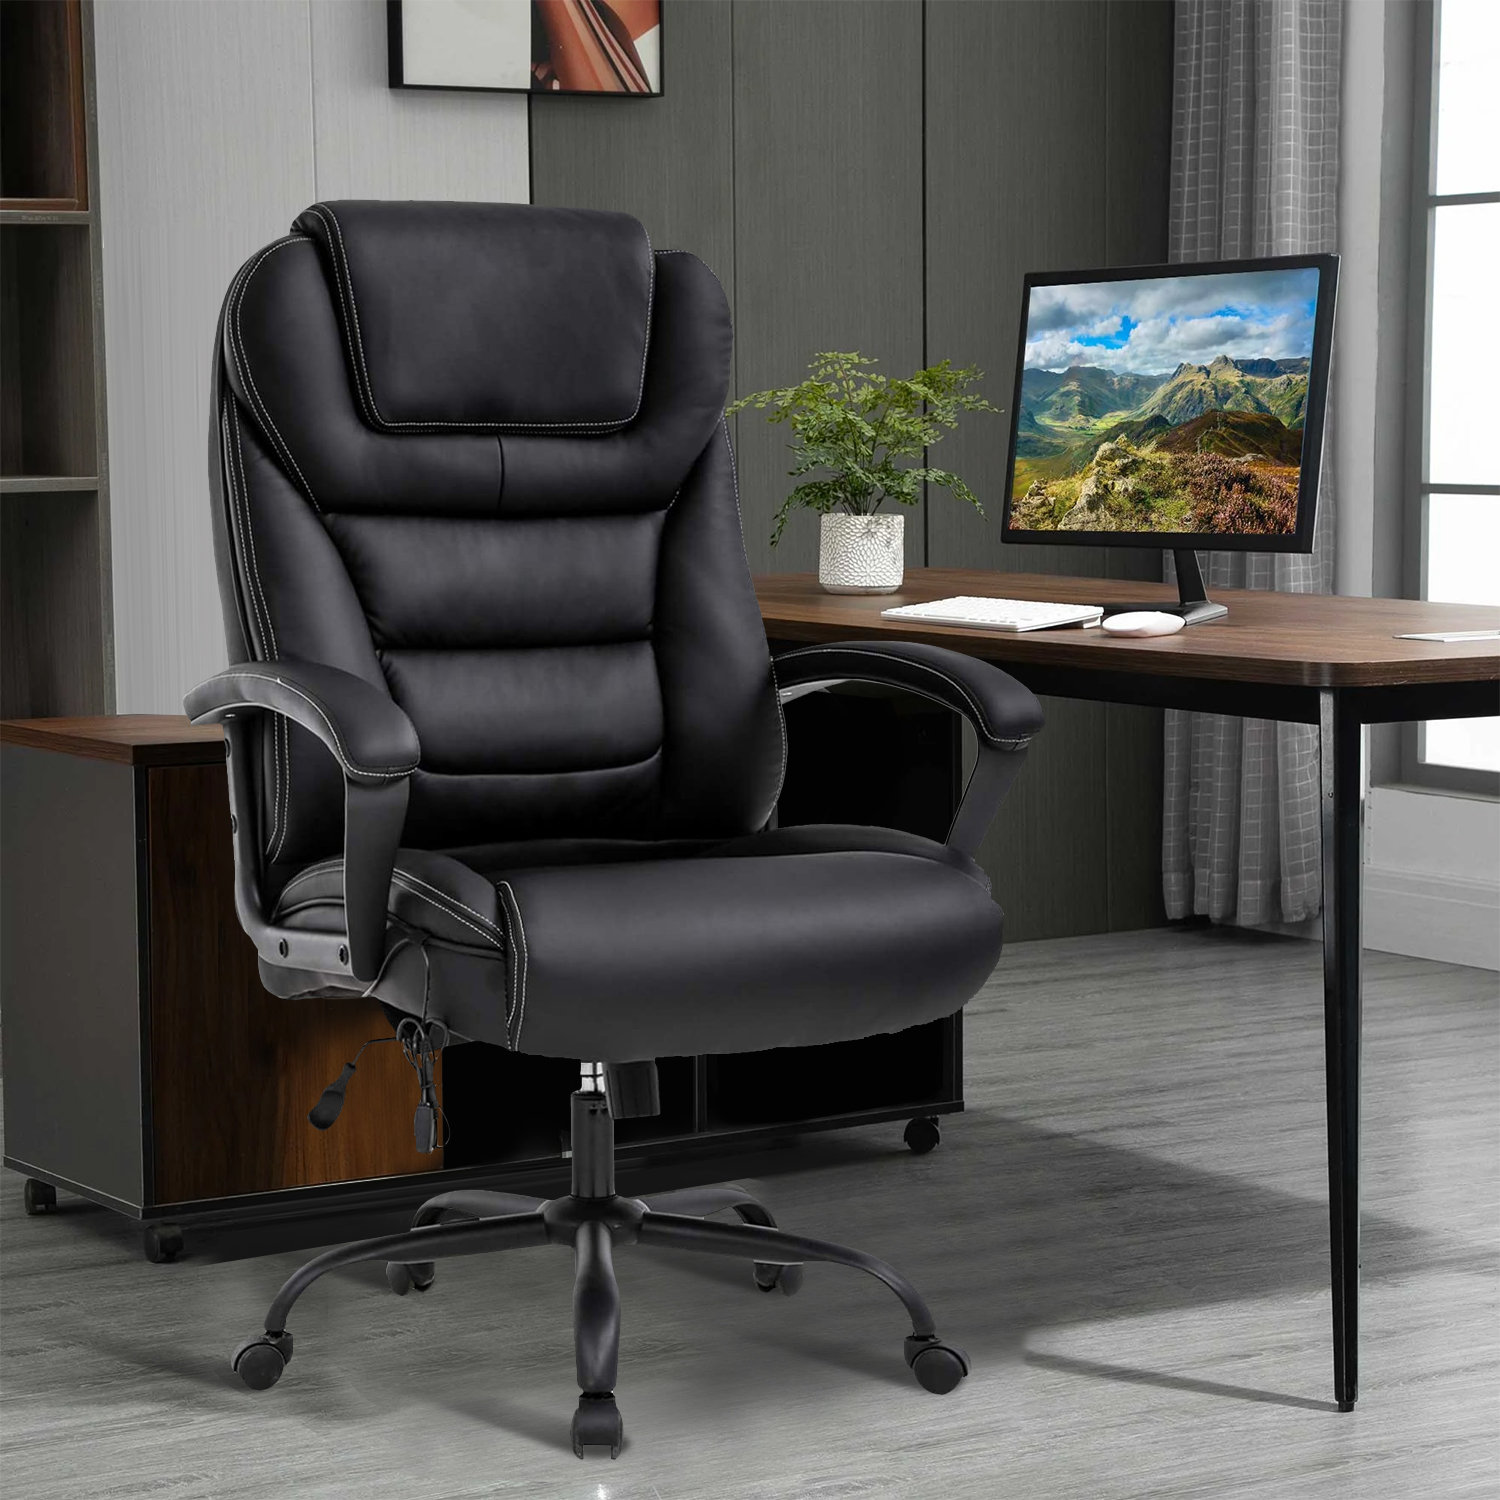 Jakyrah High Back Executive Faux Leather Office Chair with Back Support, Armrest and Lumbar Support Inbox Zero Upholstery Color: Gray